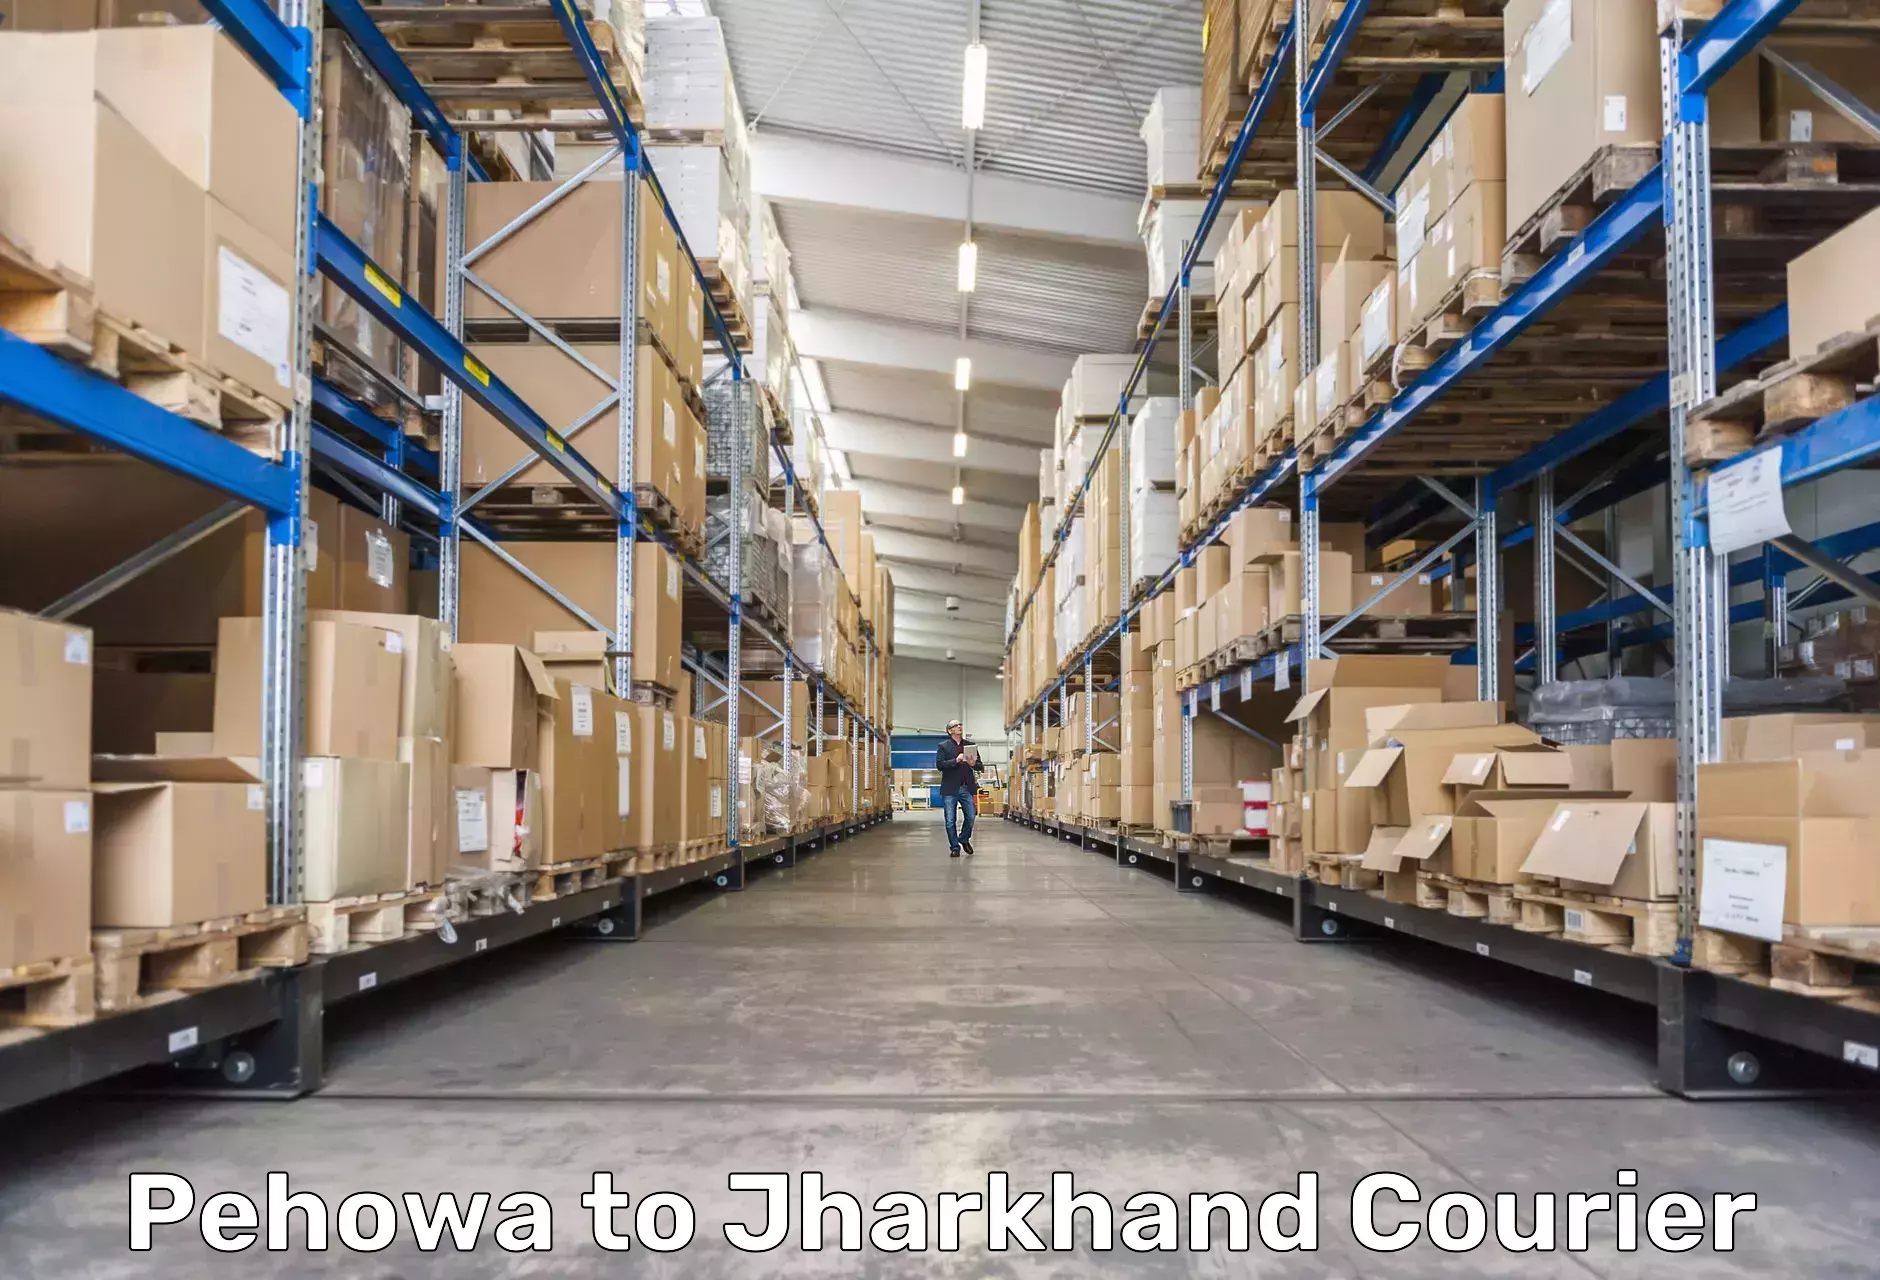 Cargo delivery service Pehowa to Jharkhand